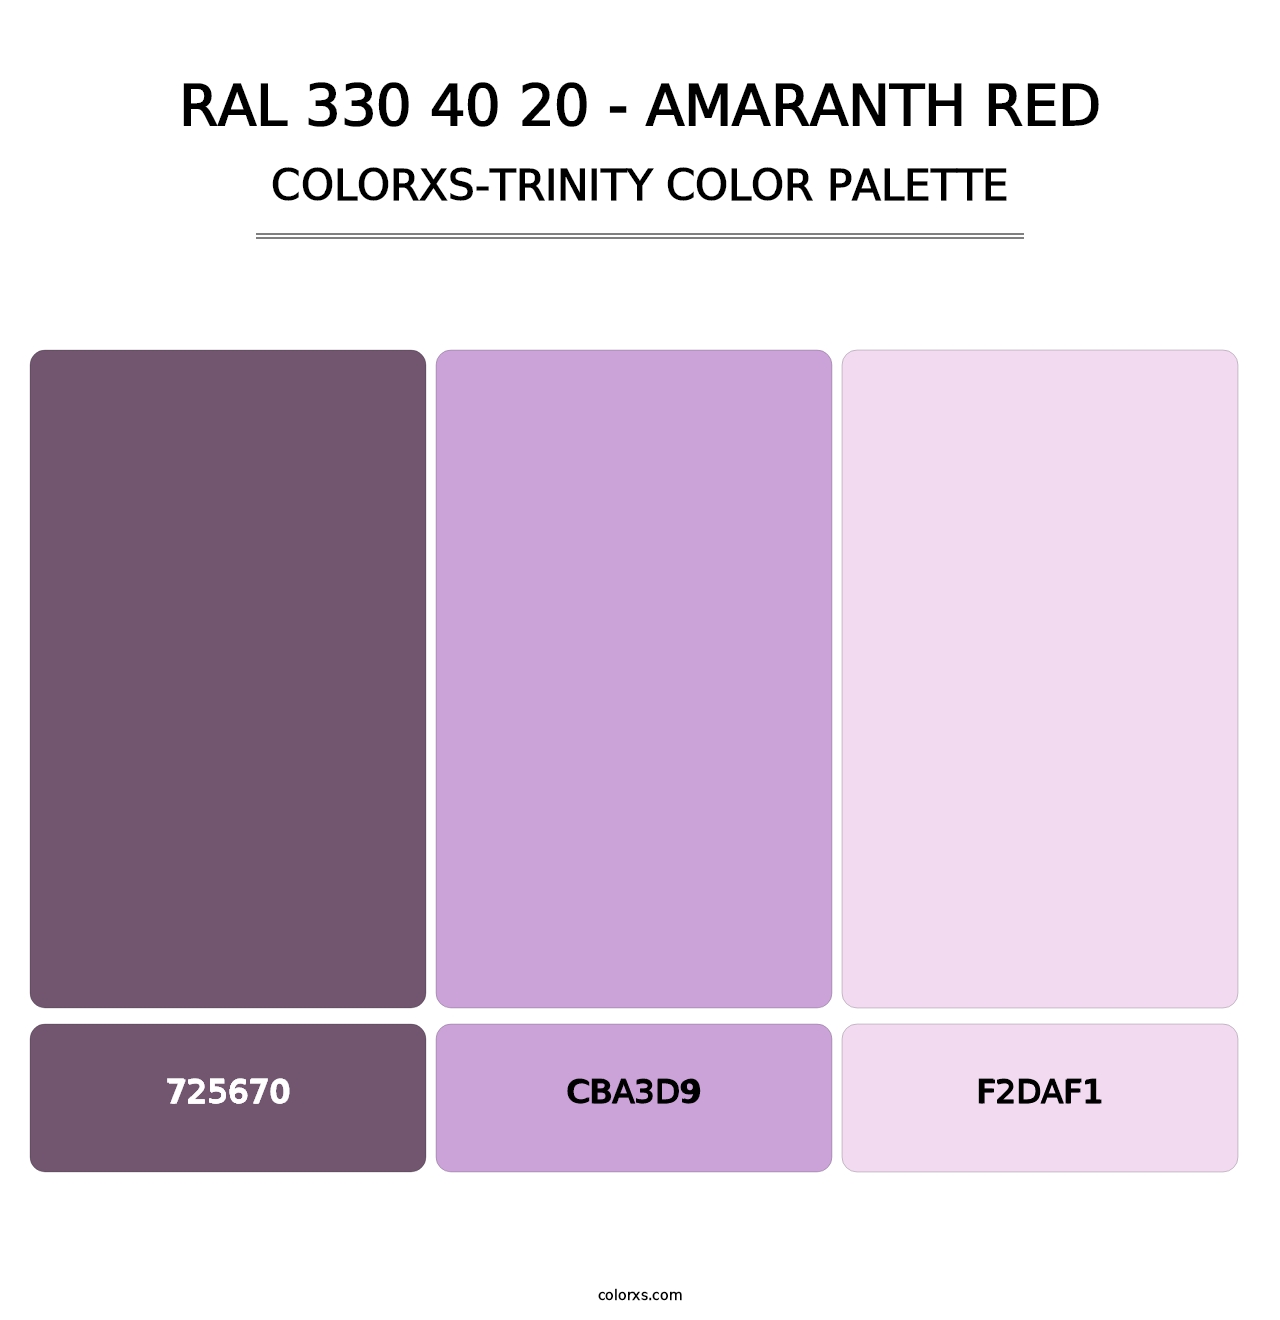 RAL 330 40 20 - Amaranth Red - Colorxs Trinity Palette